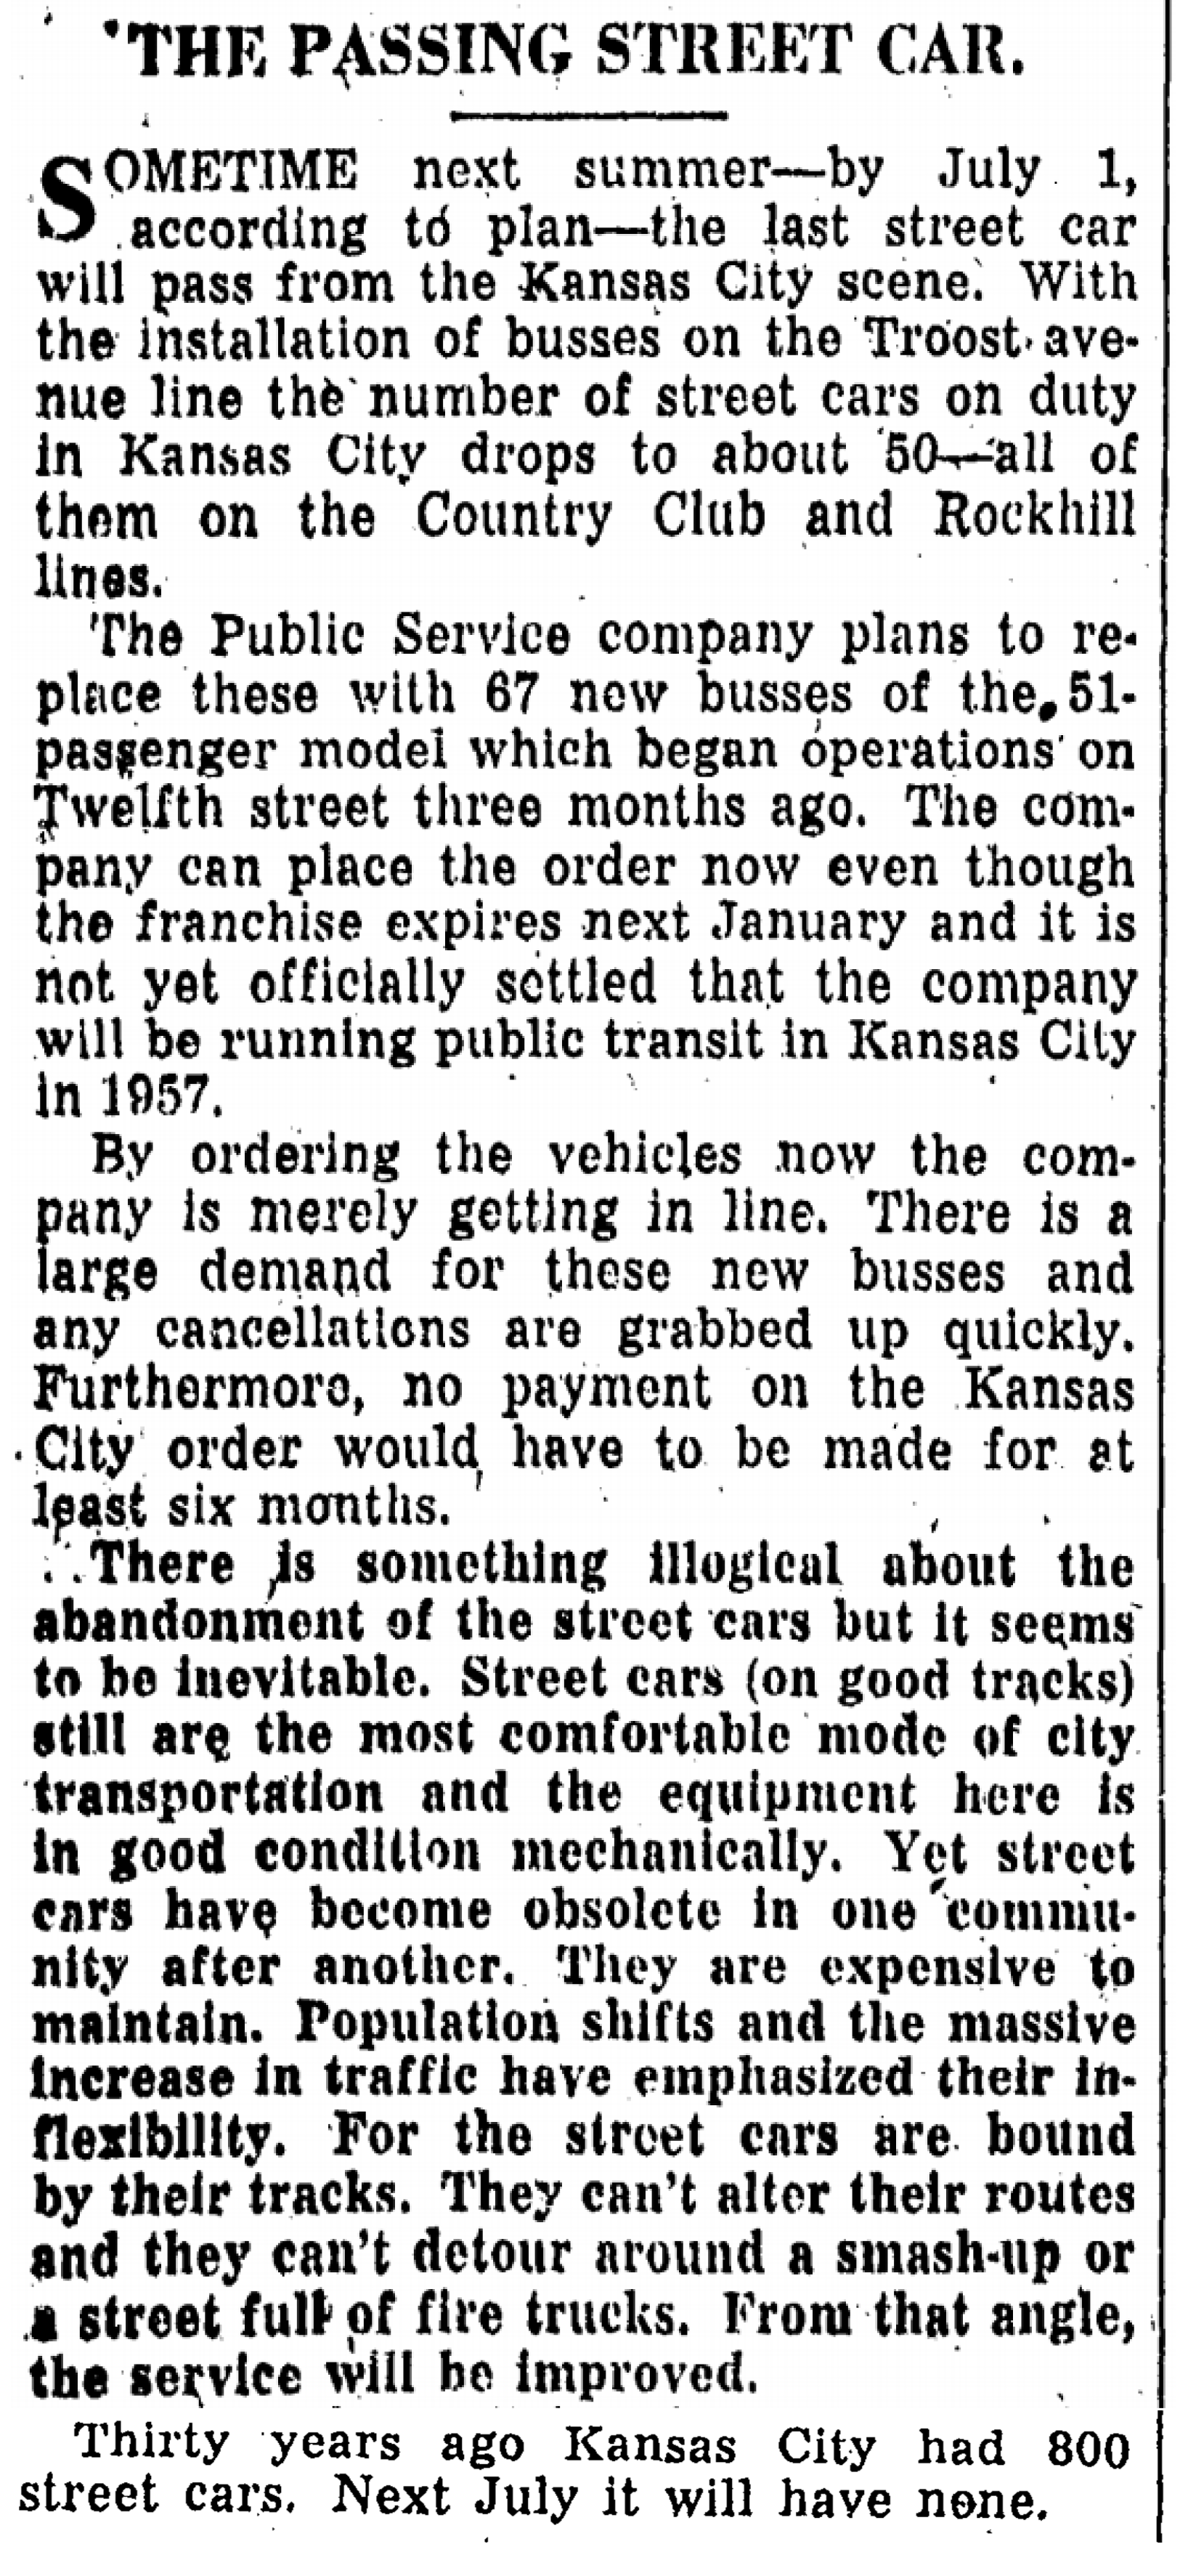 An image of the Kansas City Star article that details the massive reduction of street cars in the mid-twentieth century in Kansas City, Missouri.